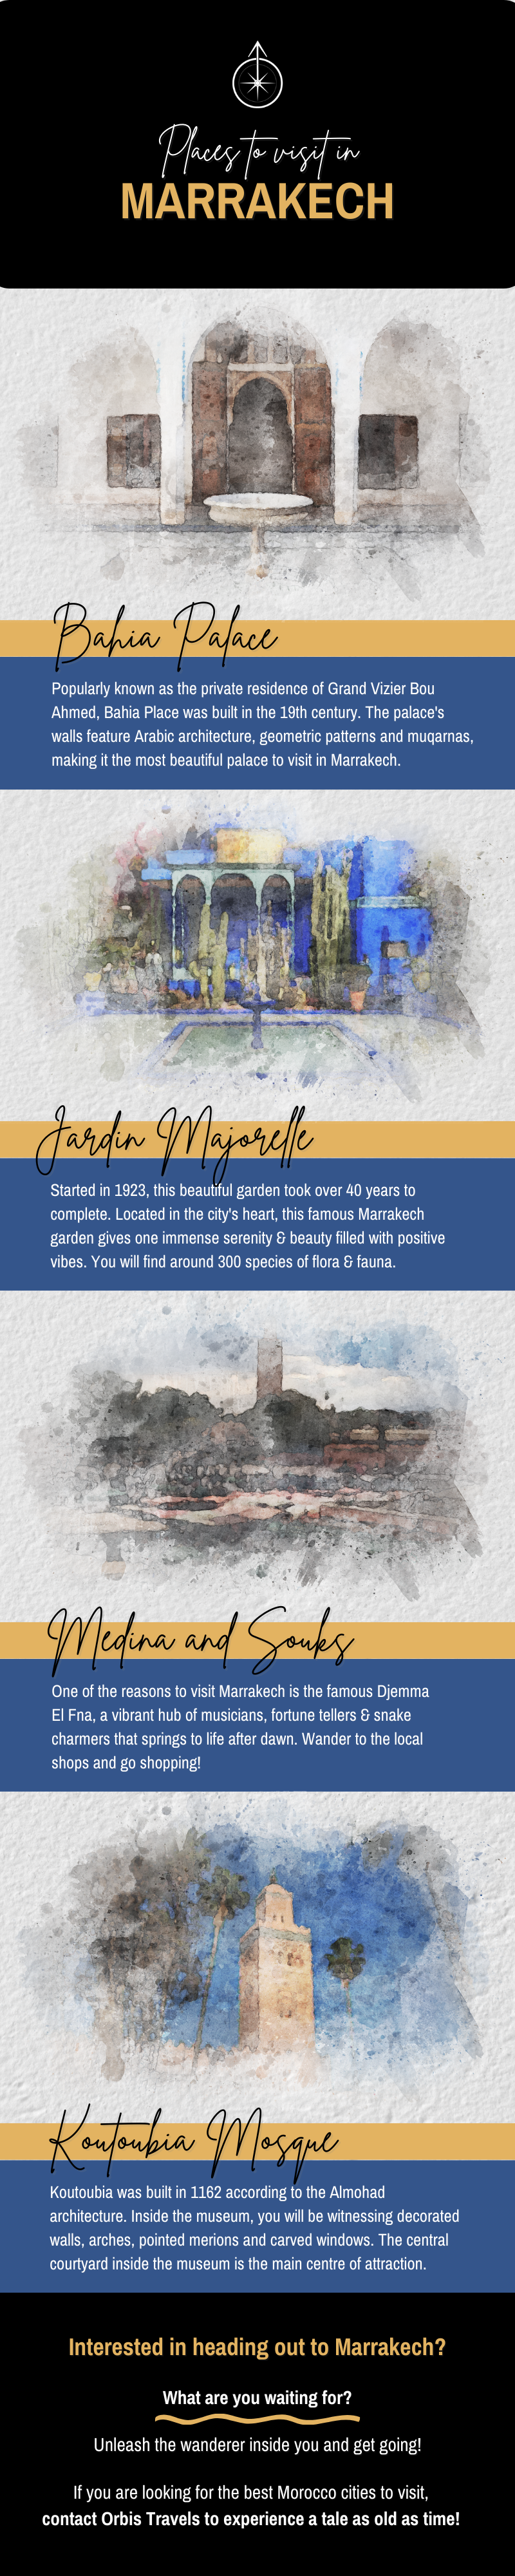 places to visit in Marrakech infographic